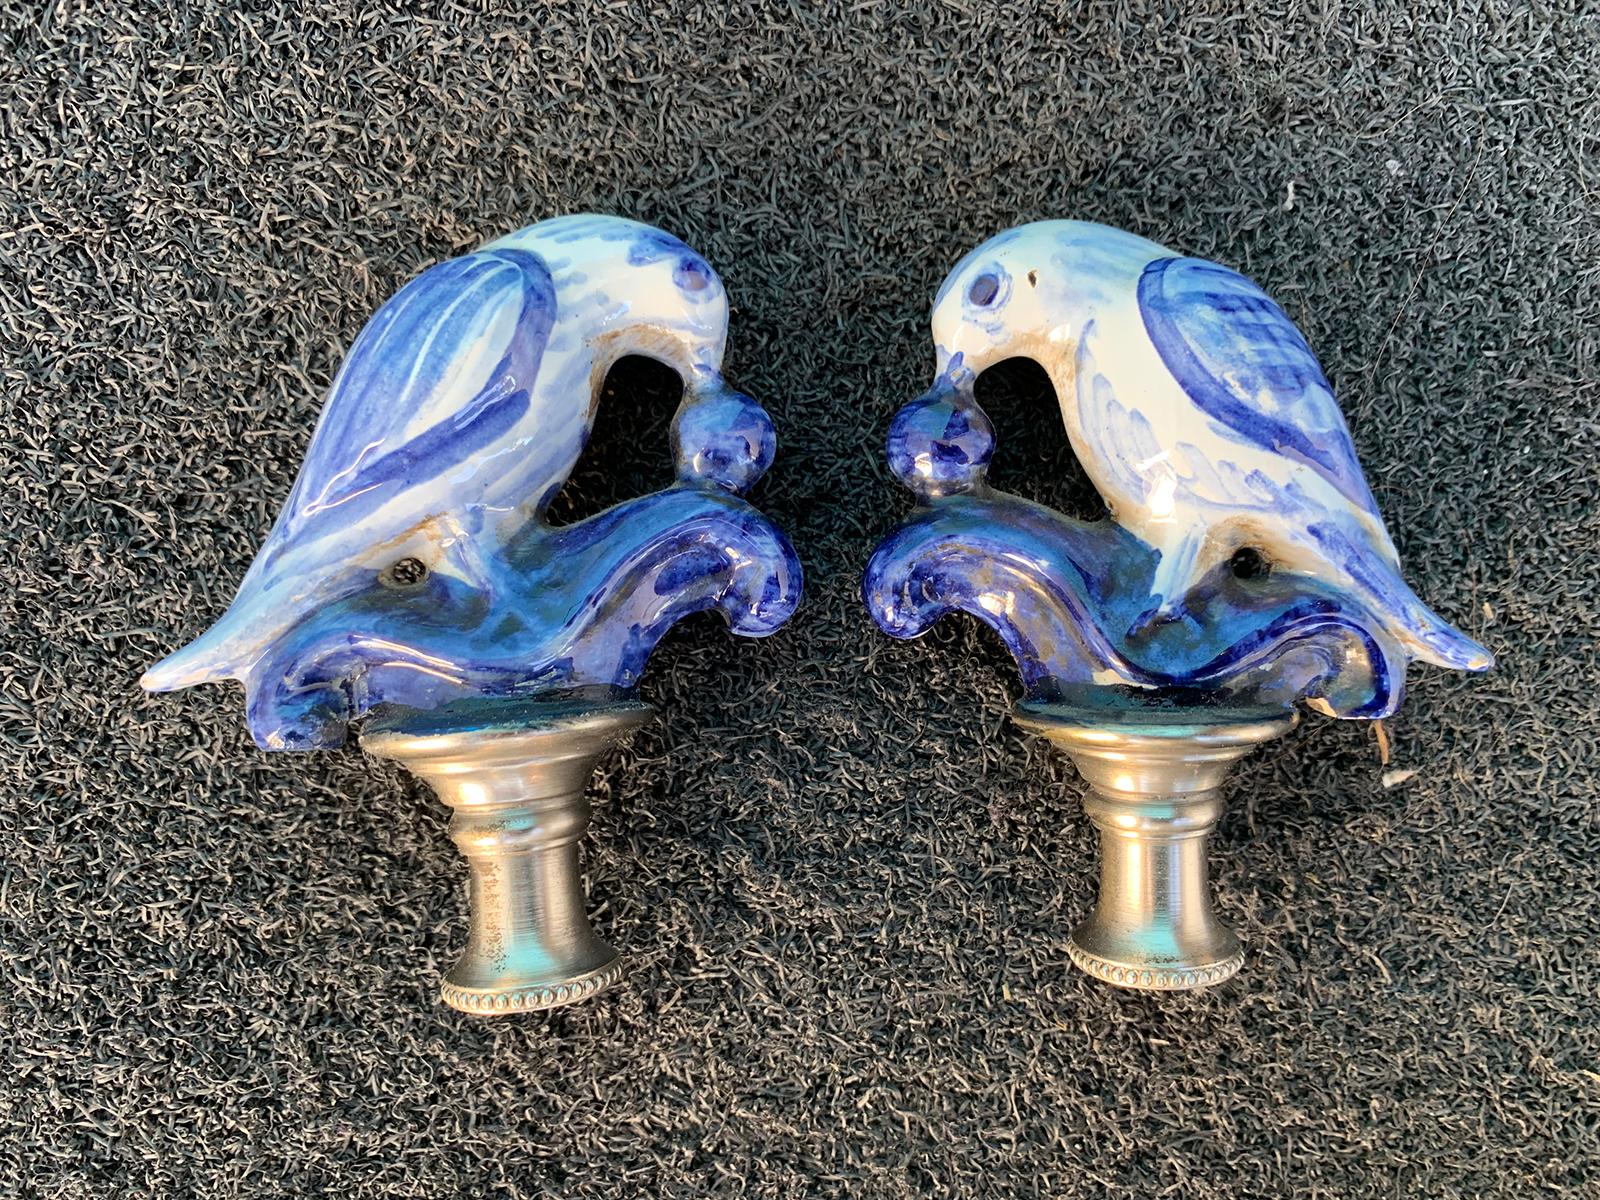 Pair of 19th century Dutch delft blue and white lamps with porcelain parrot finials
Measures: 7.25